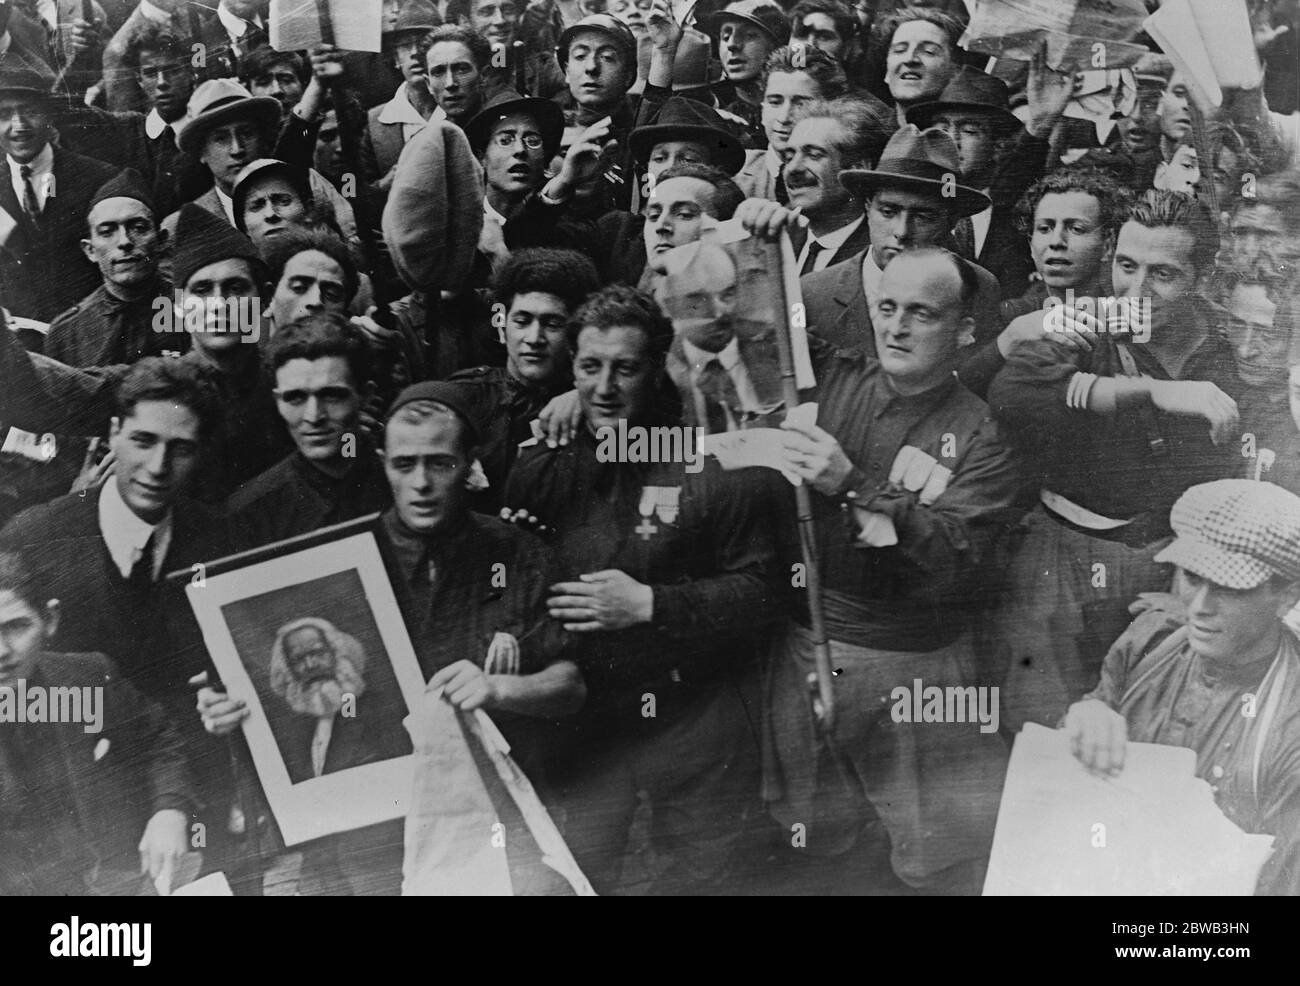 First picture of Fascisti arrival in Rome . Fascisti carrying captured pictures of Karl Marx , Lenin and Trotsky on their arrival in Rome . 2 November 1922 Stock Photo